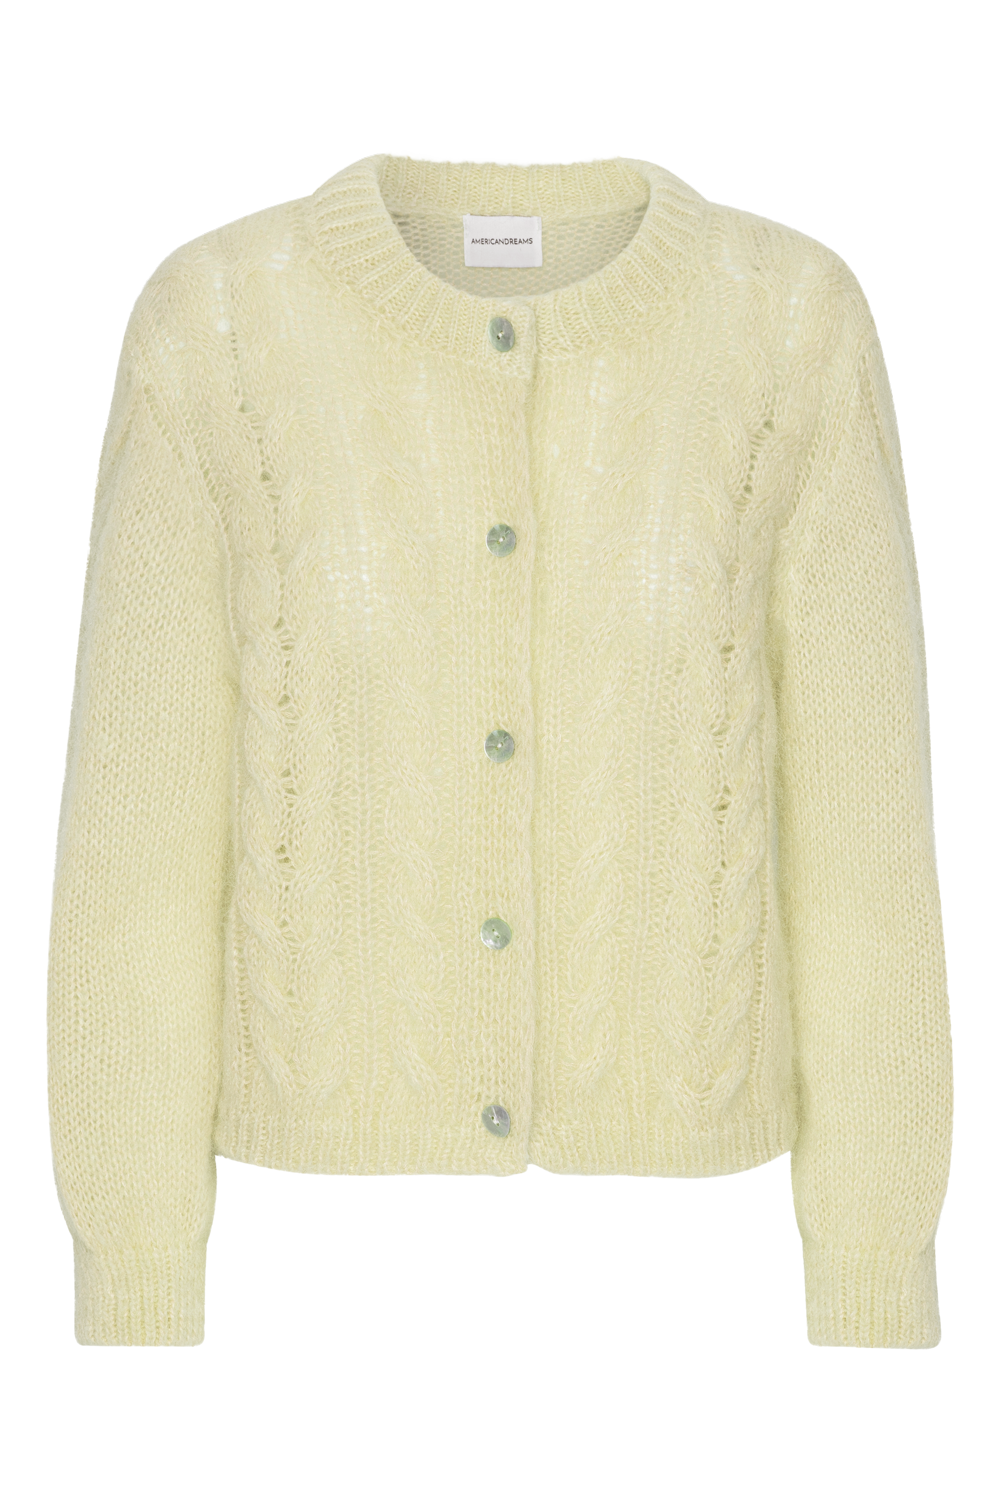 Frankie Cable Knit Cardigan Light Yellow - Sample